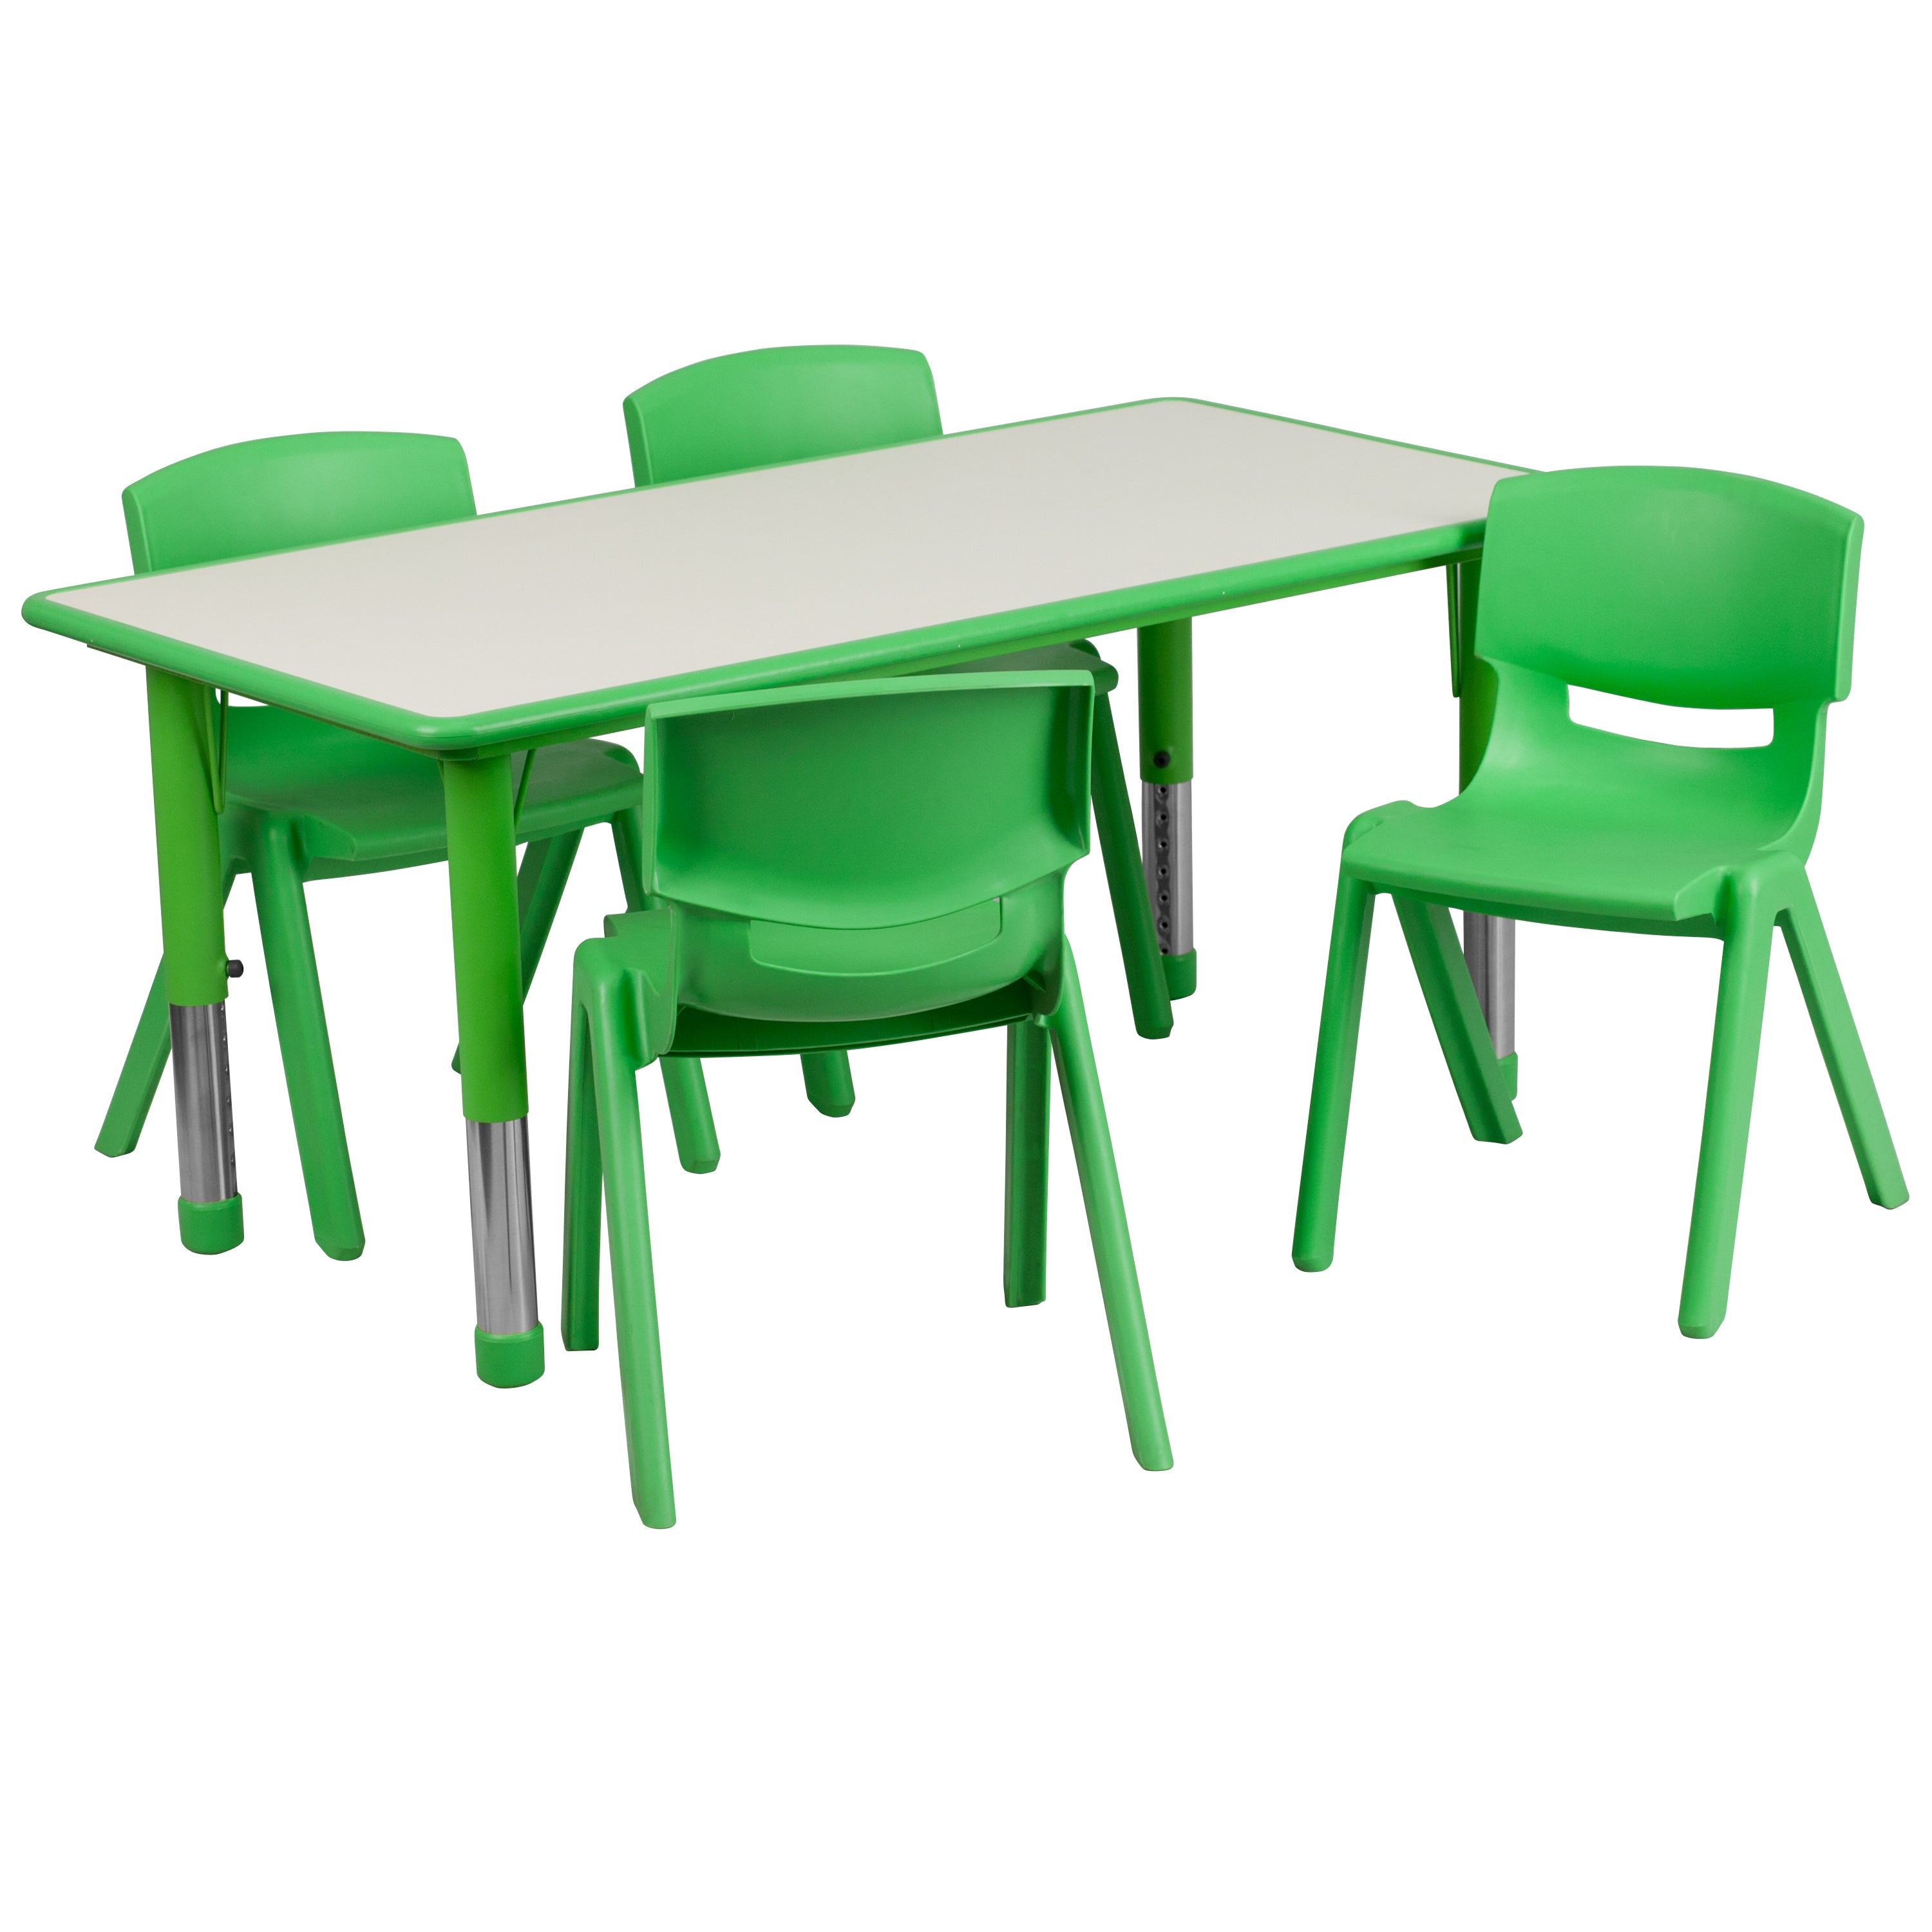 23.625"W x 47.25"L Rectangular Plastic Height Adjustable Activity Table Set with 4 Chairs-Rectangular Activity Table Set-Flash Furniture-Wall2Wall Furnishings